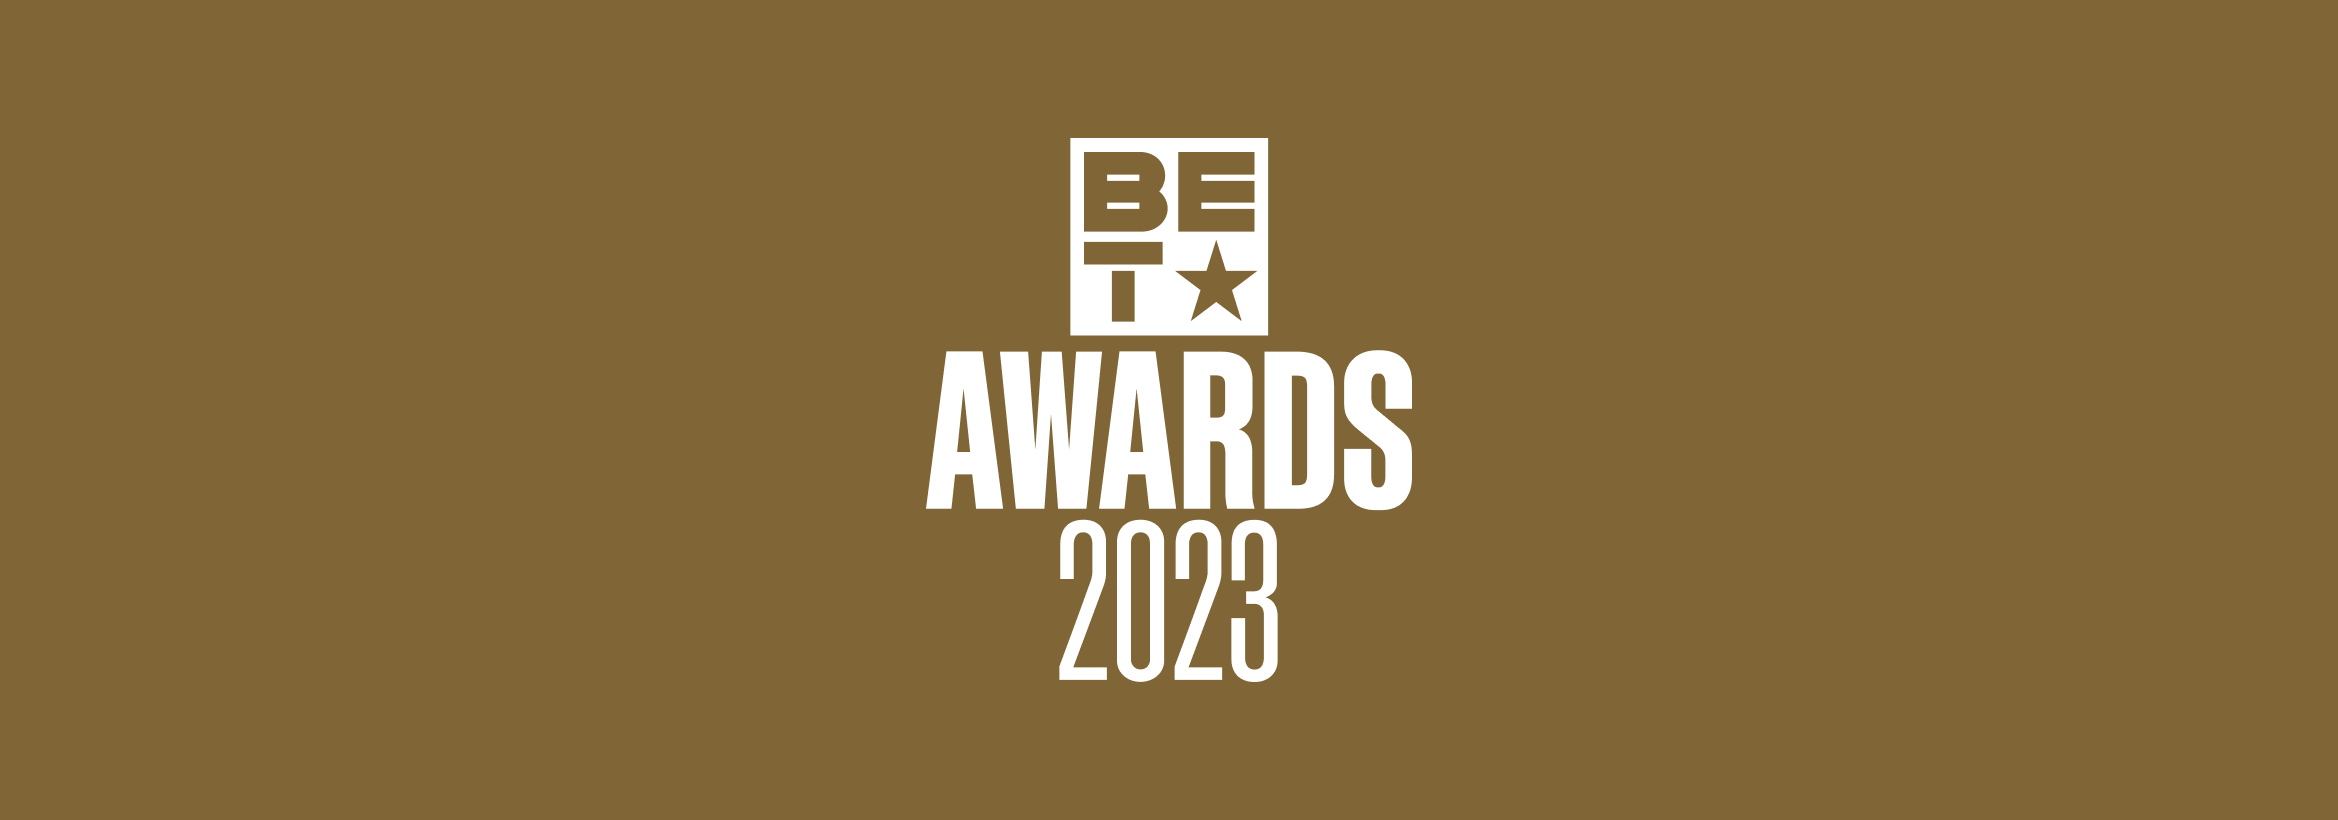 Where To Watch Bet Awards 